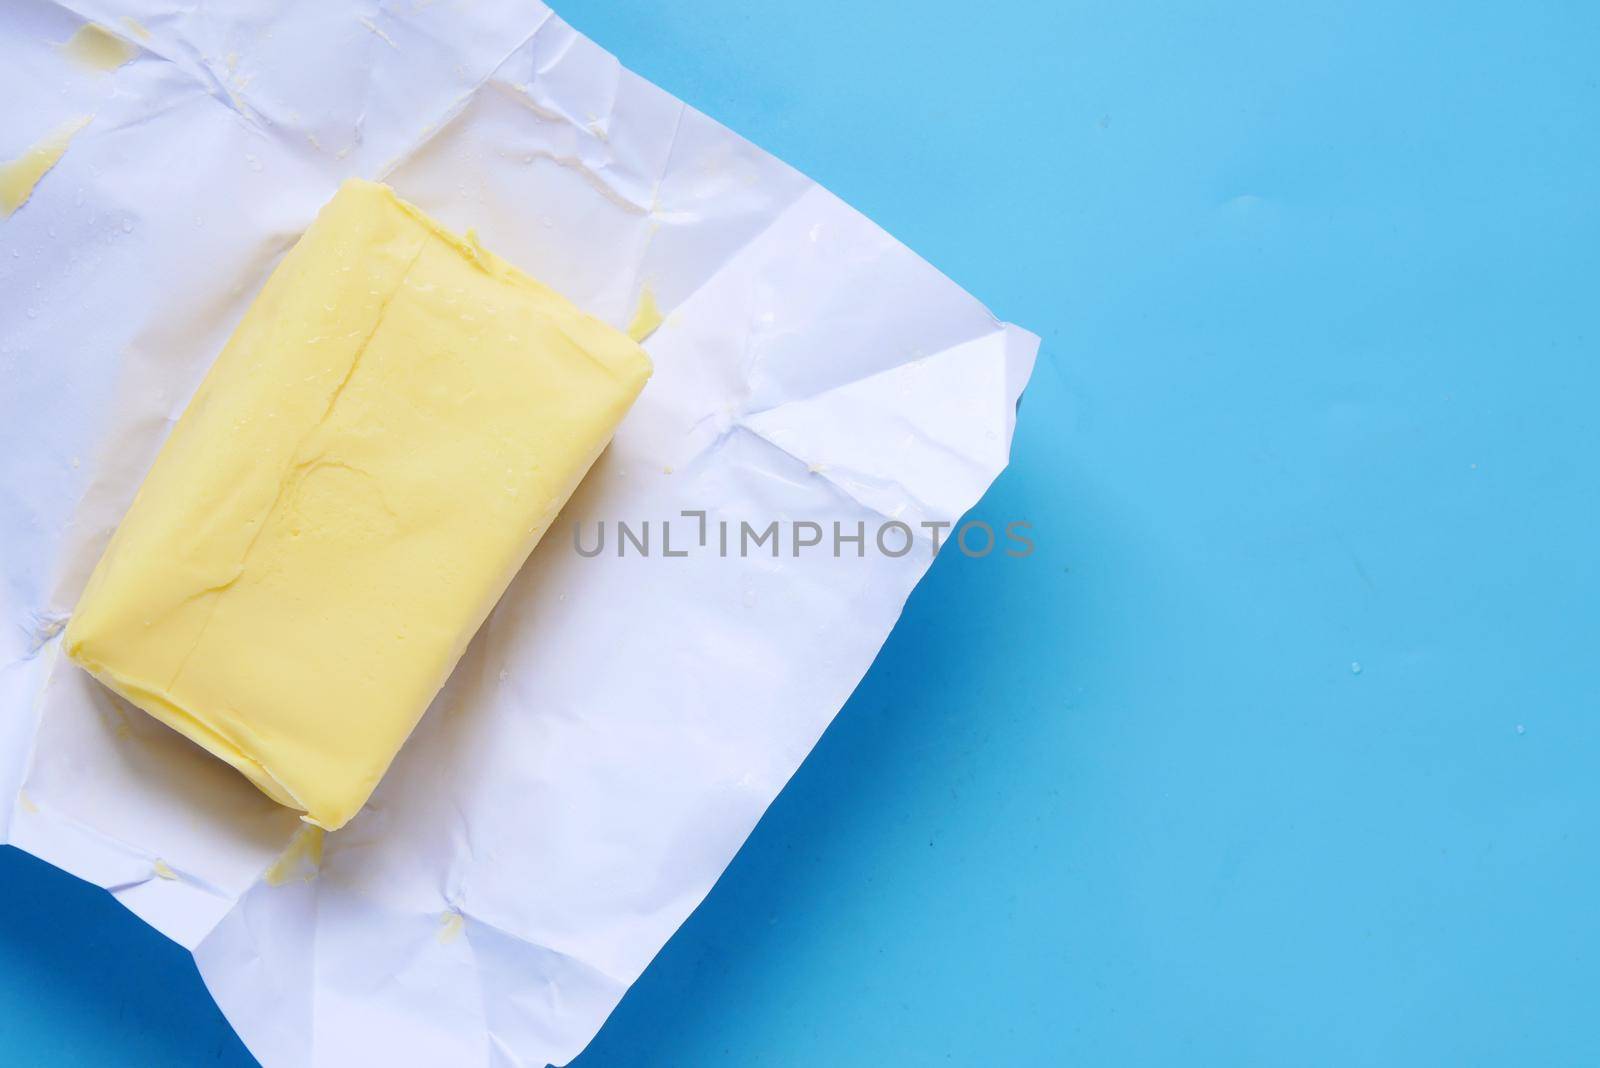 slice of a butter on a paper on table .